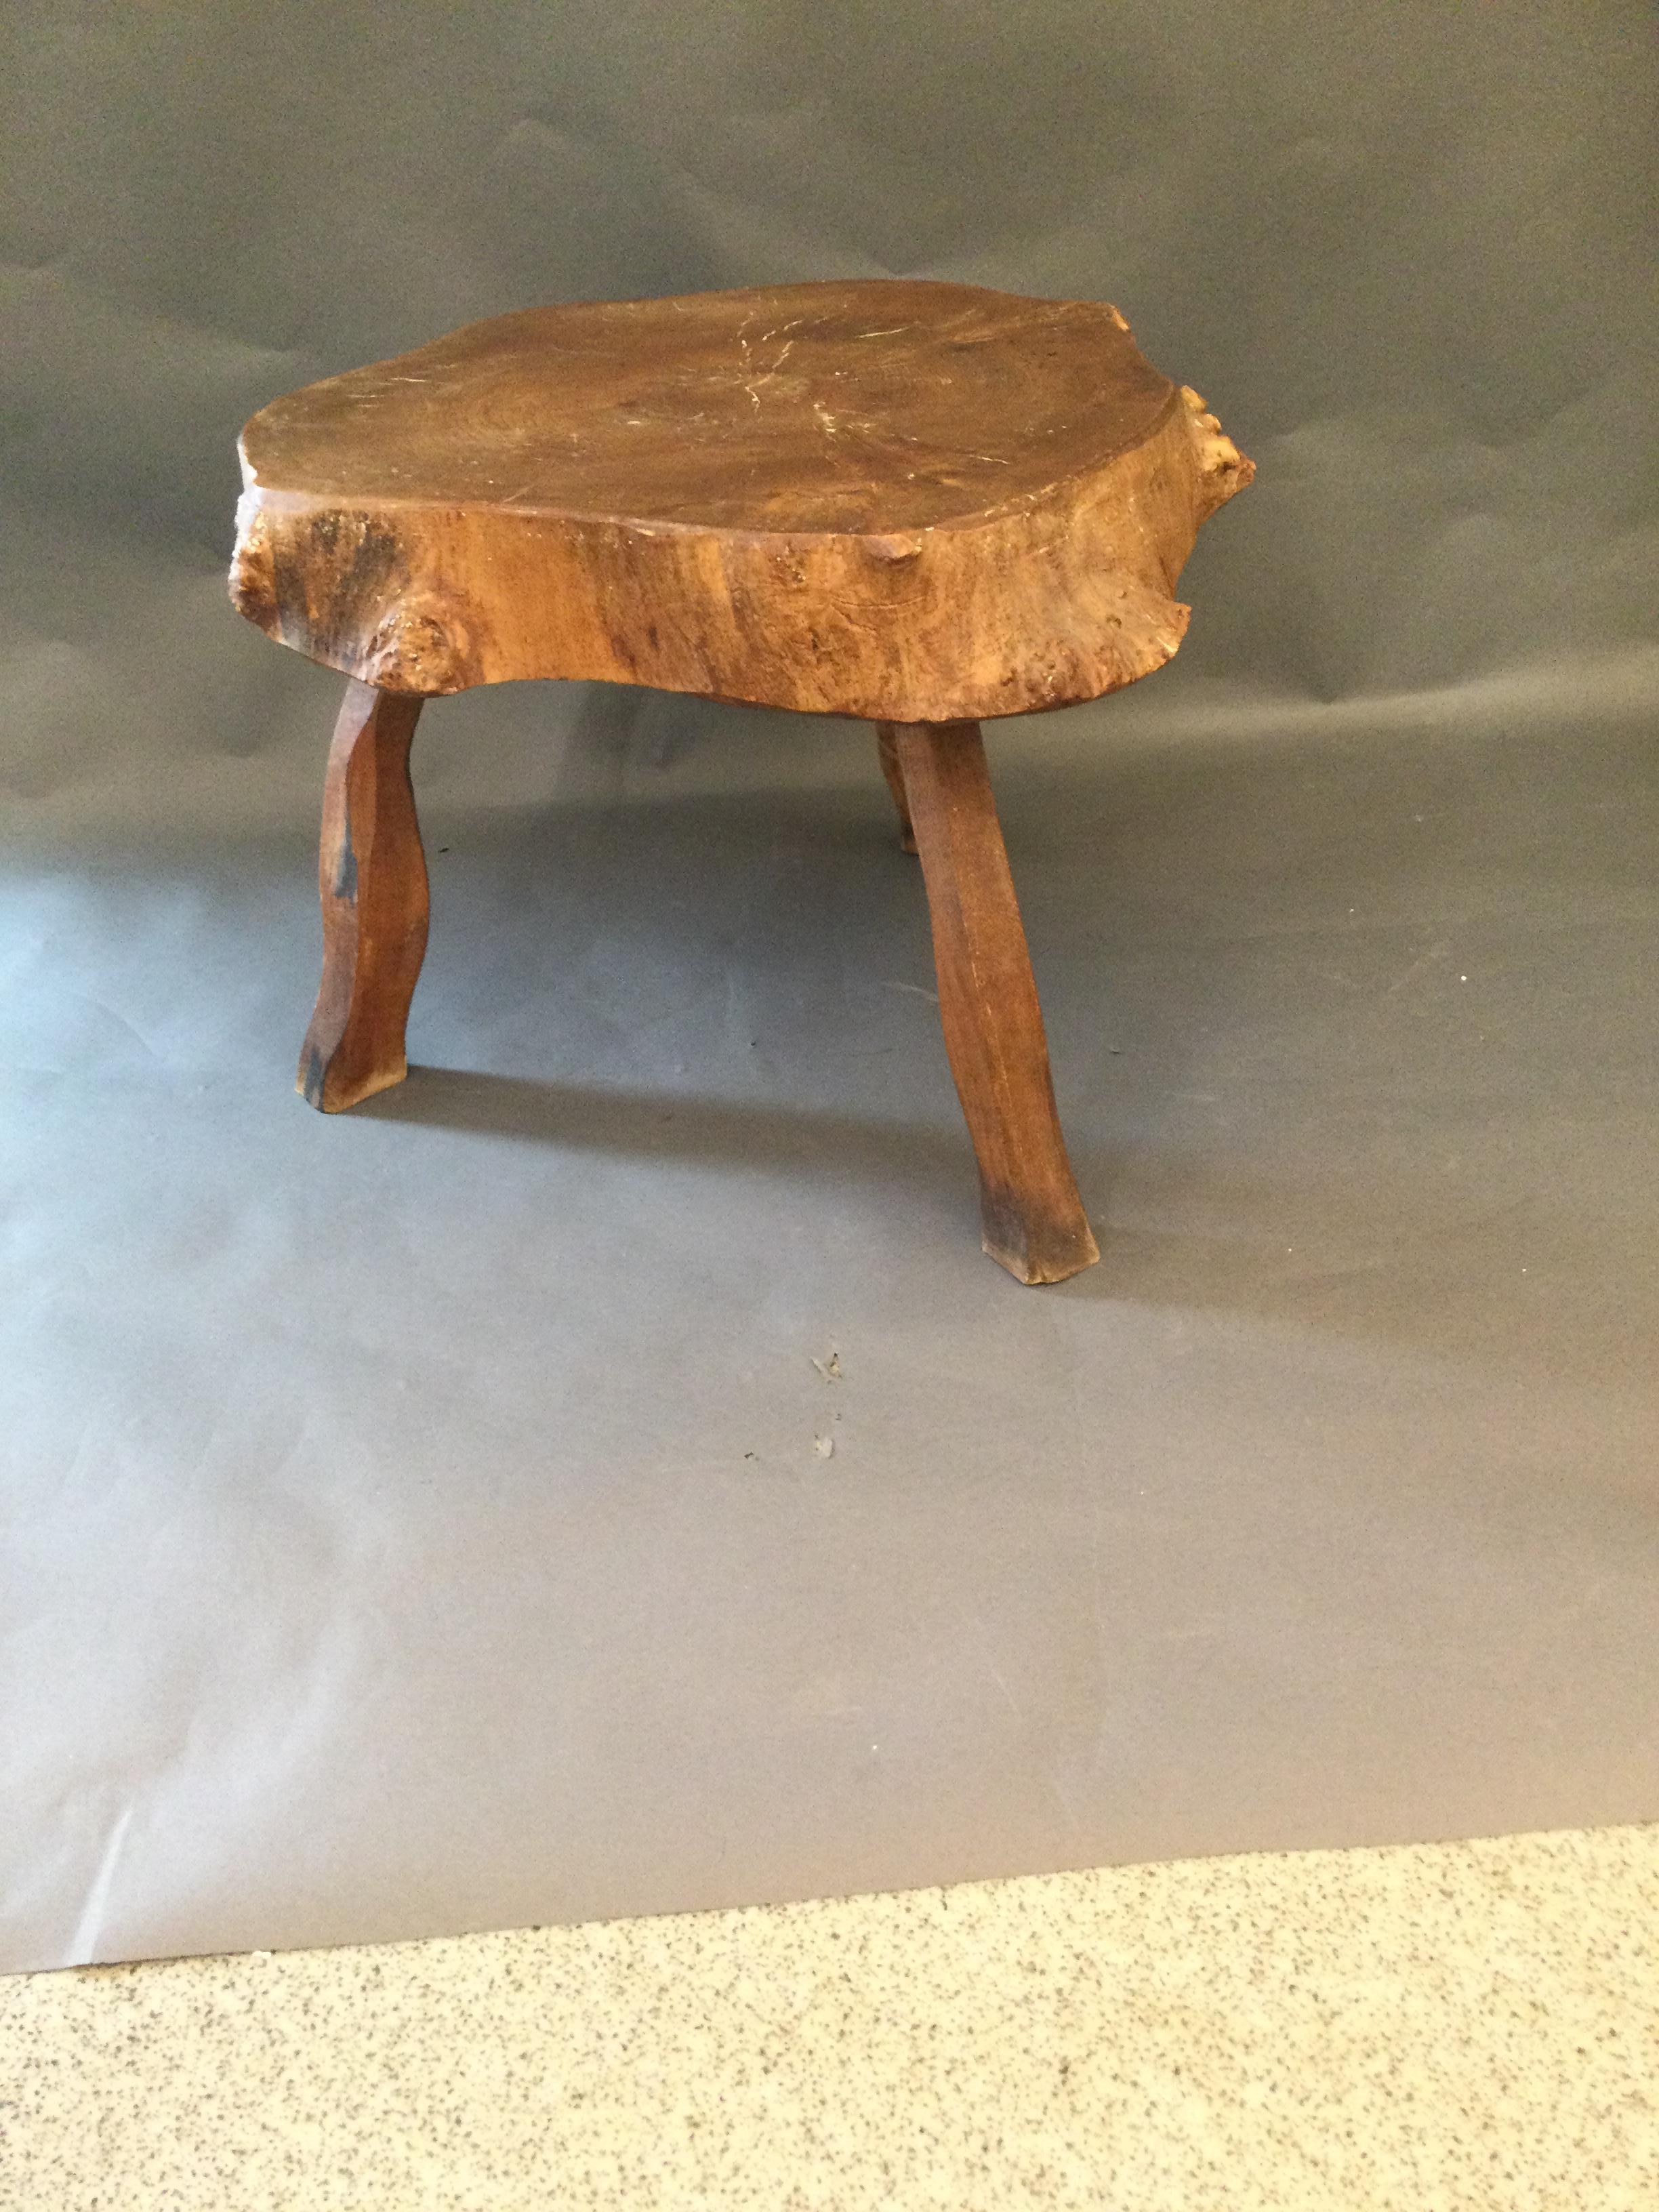 Rare and very beautiful little coffee or side table made out of solid wood and produced in France in the 1960s.
In good vintage condition with some signs and patina from age and use. Stable and good to use the top is ten centimetres thick.